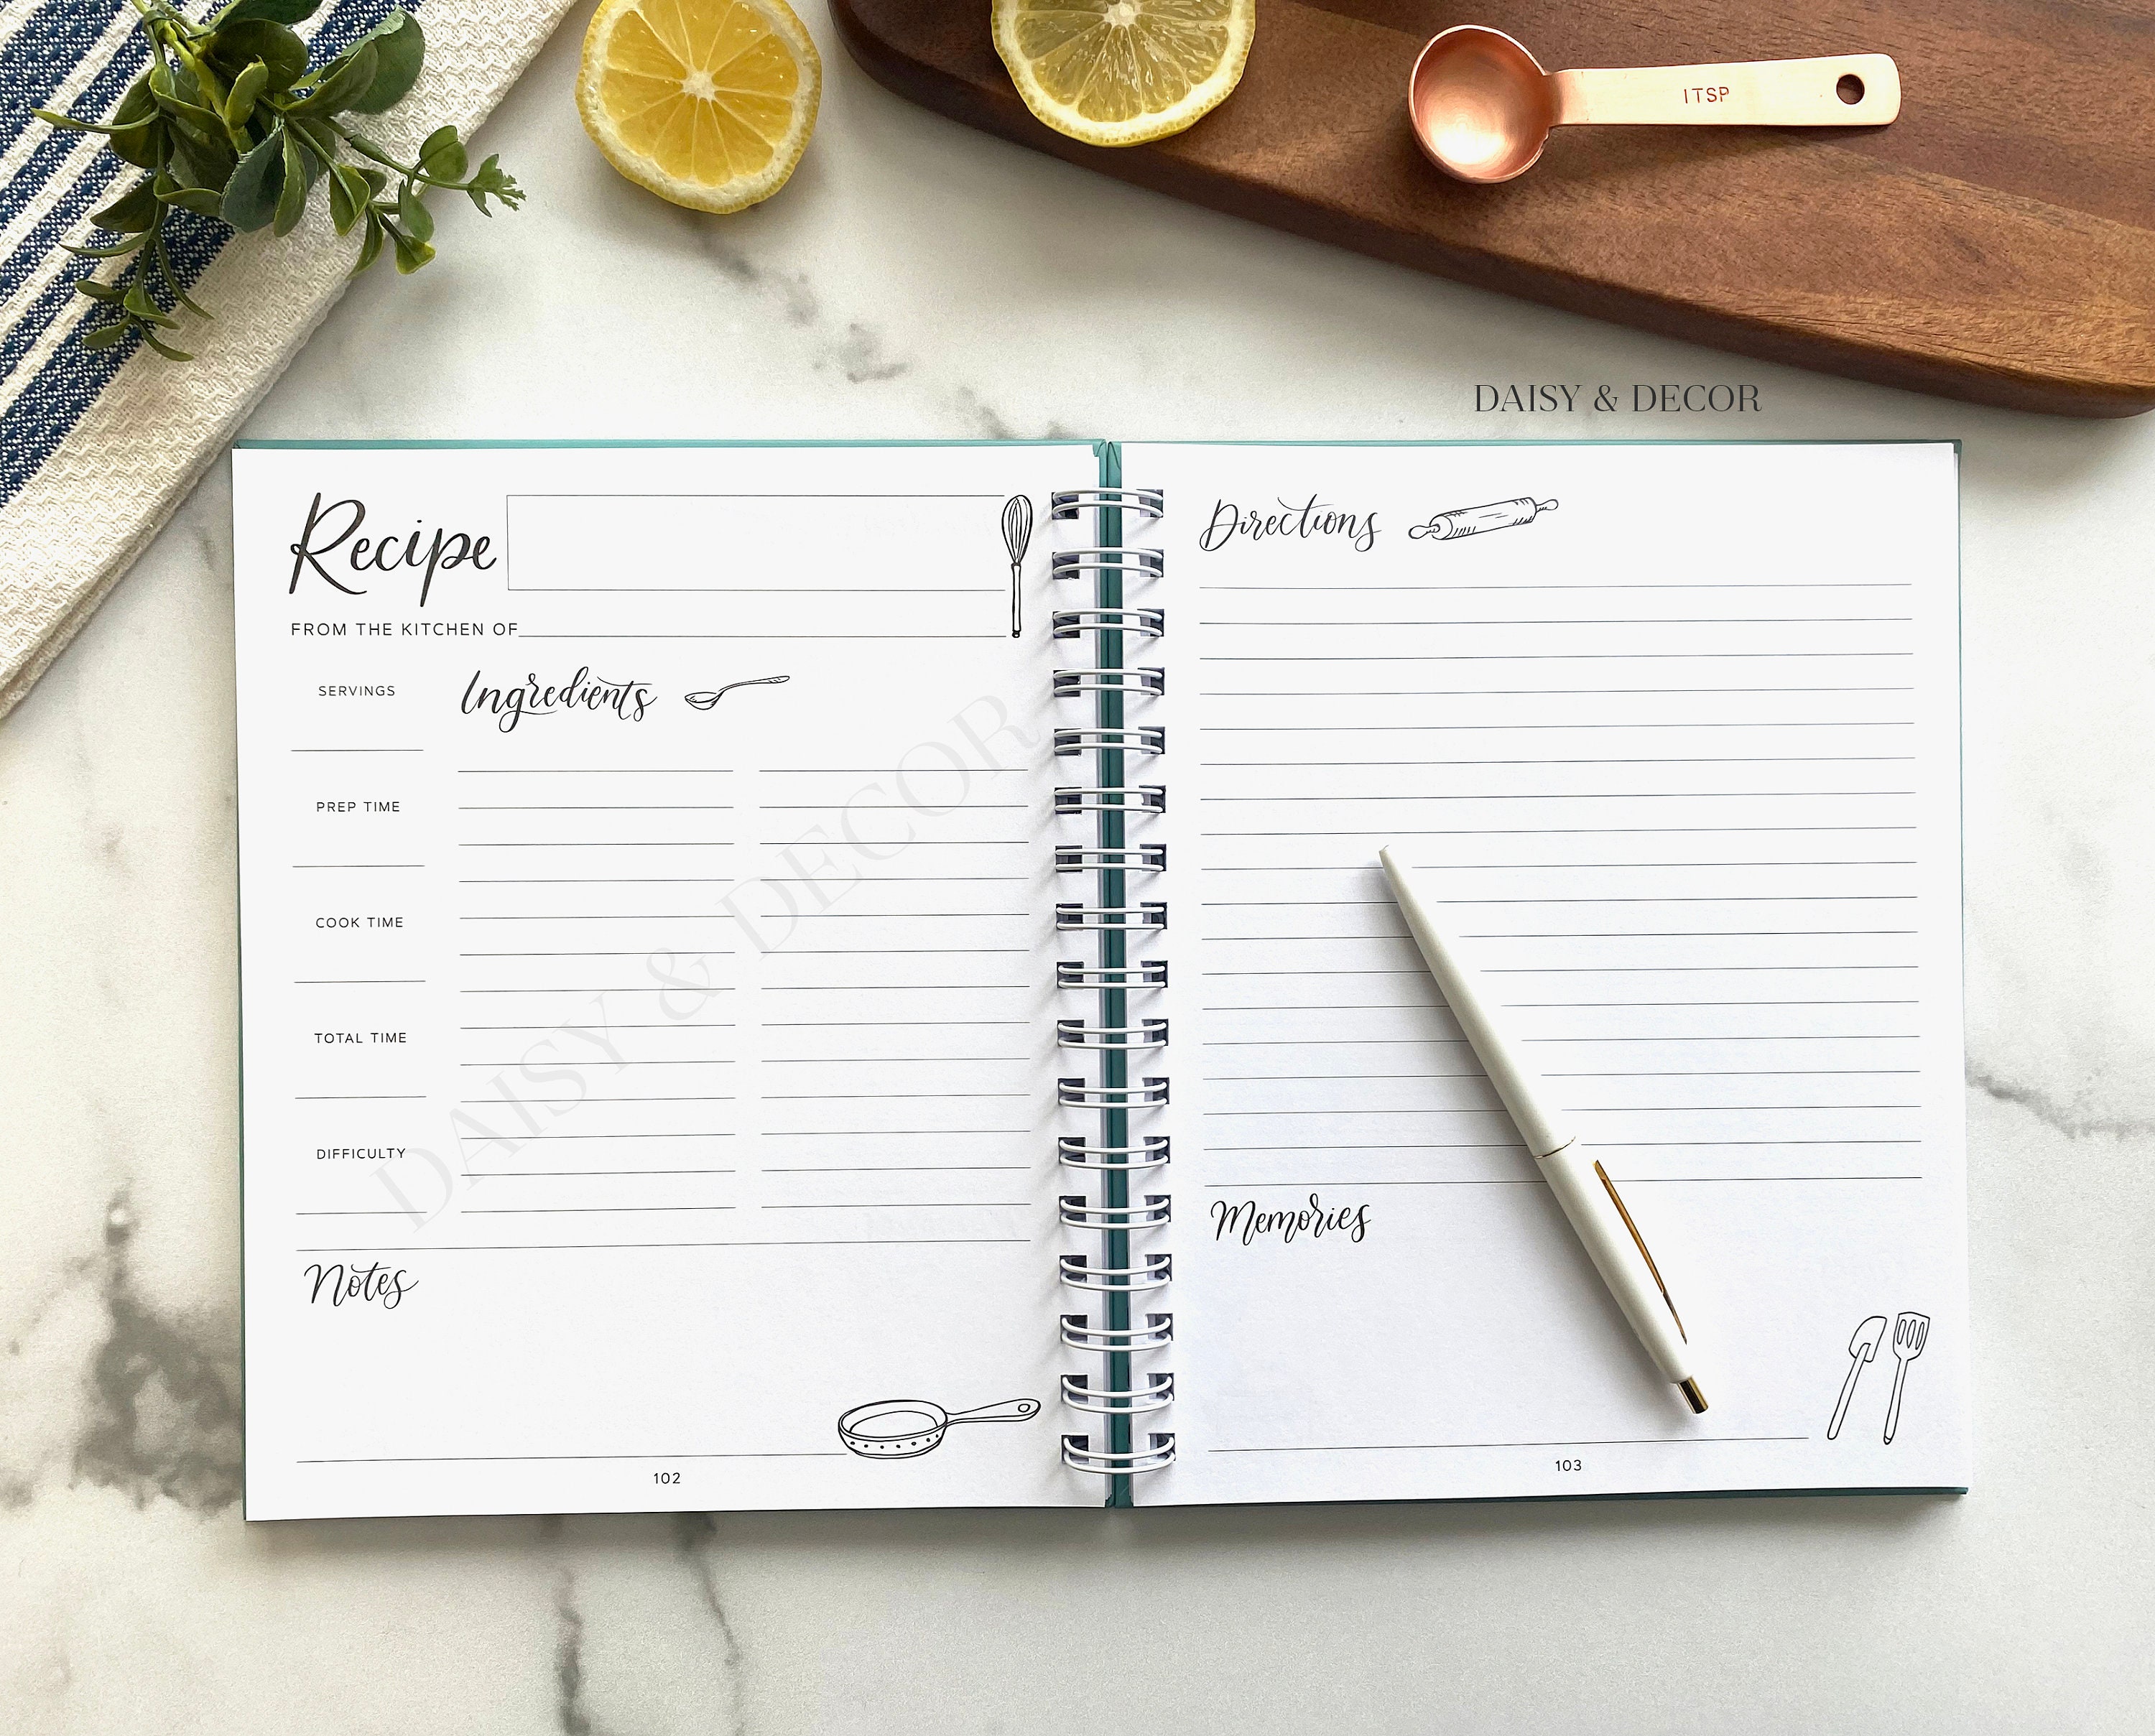 Kunitsa Co. Recipe Notebook - Keepsake Gift. Hardcover Blank Recipe Book to Write in Your Own Recipes, with Journaling Prompts About The Chef. 100